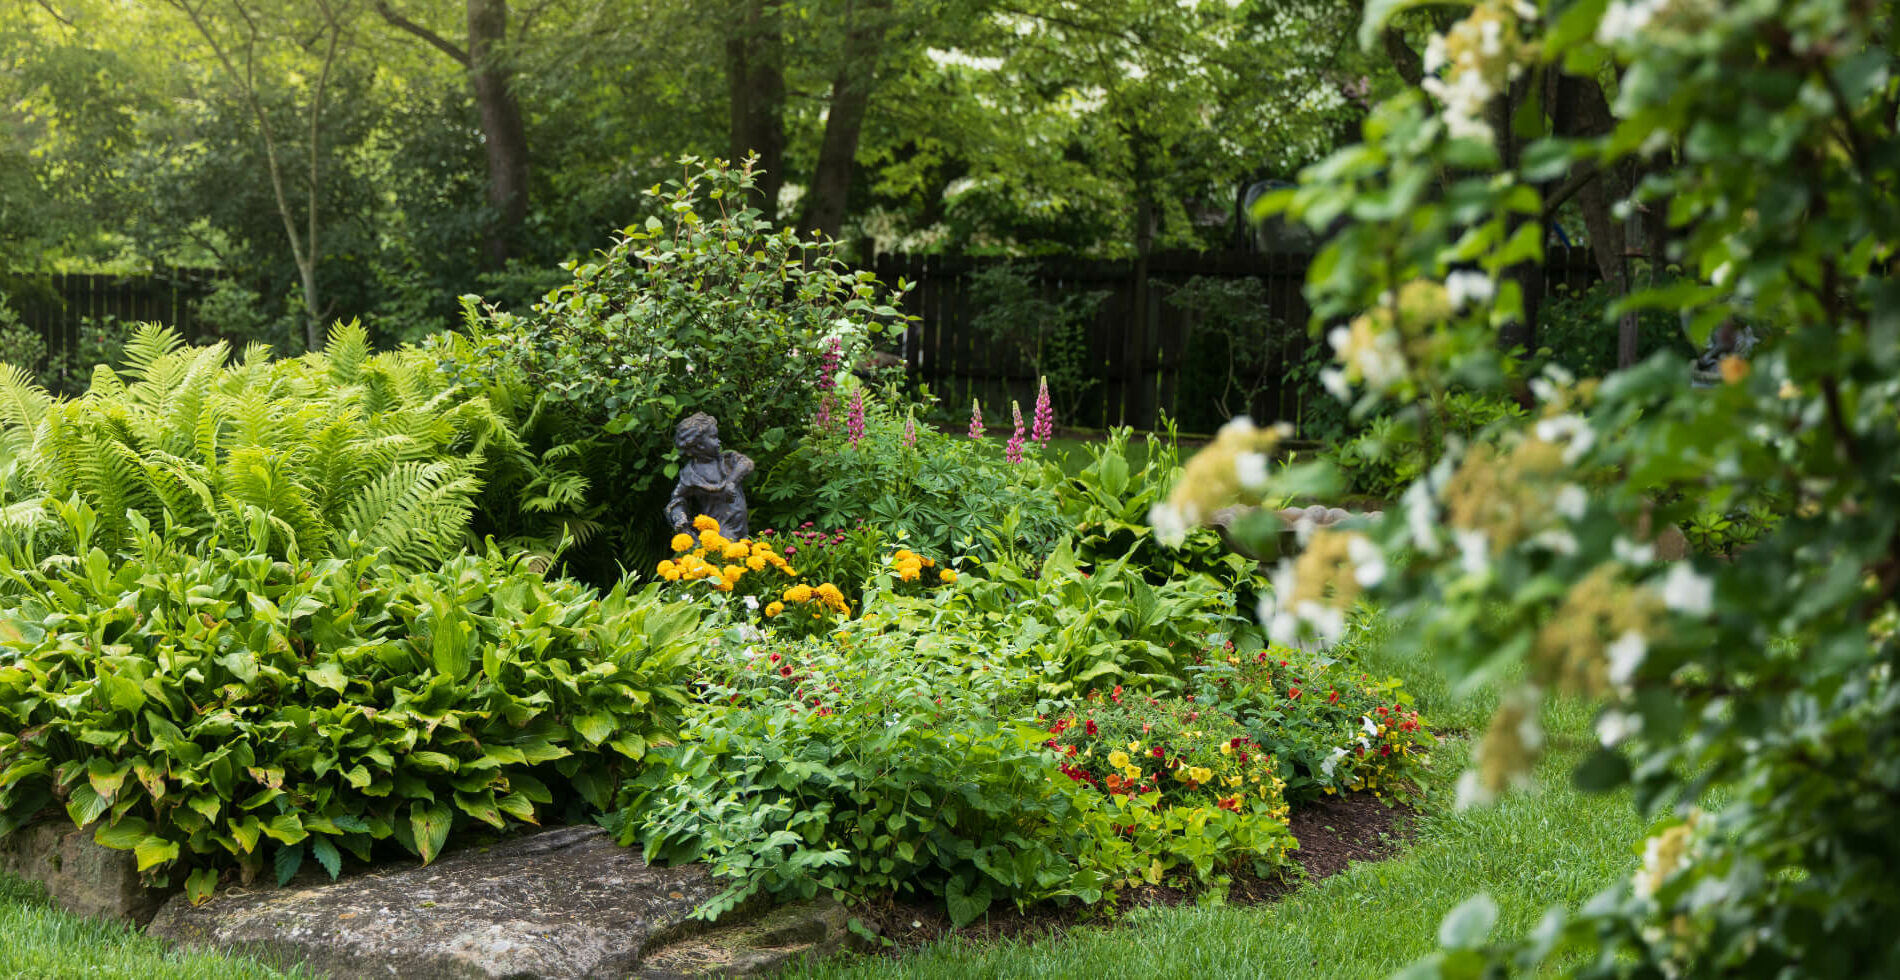 A lush garden area with mature trees and bushes, multi colored flowers, and a cherub angel statue.